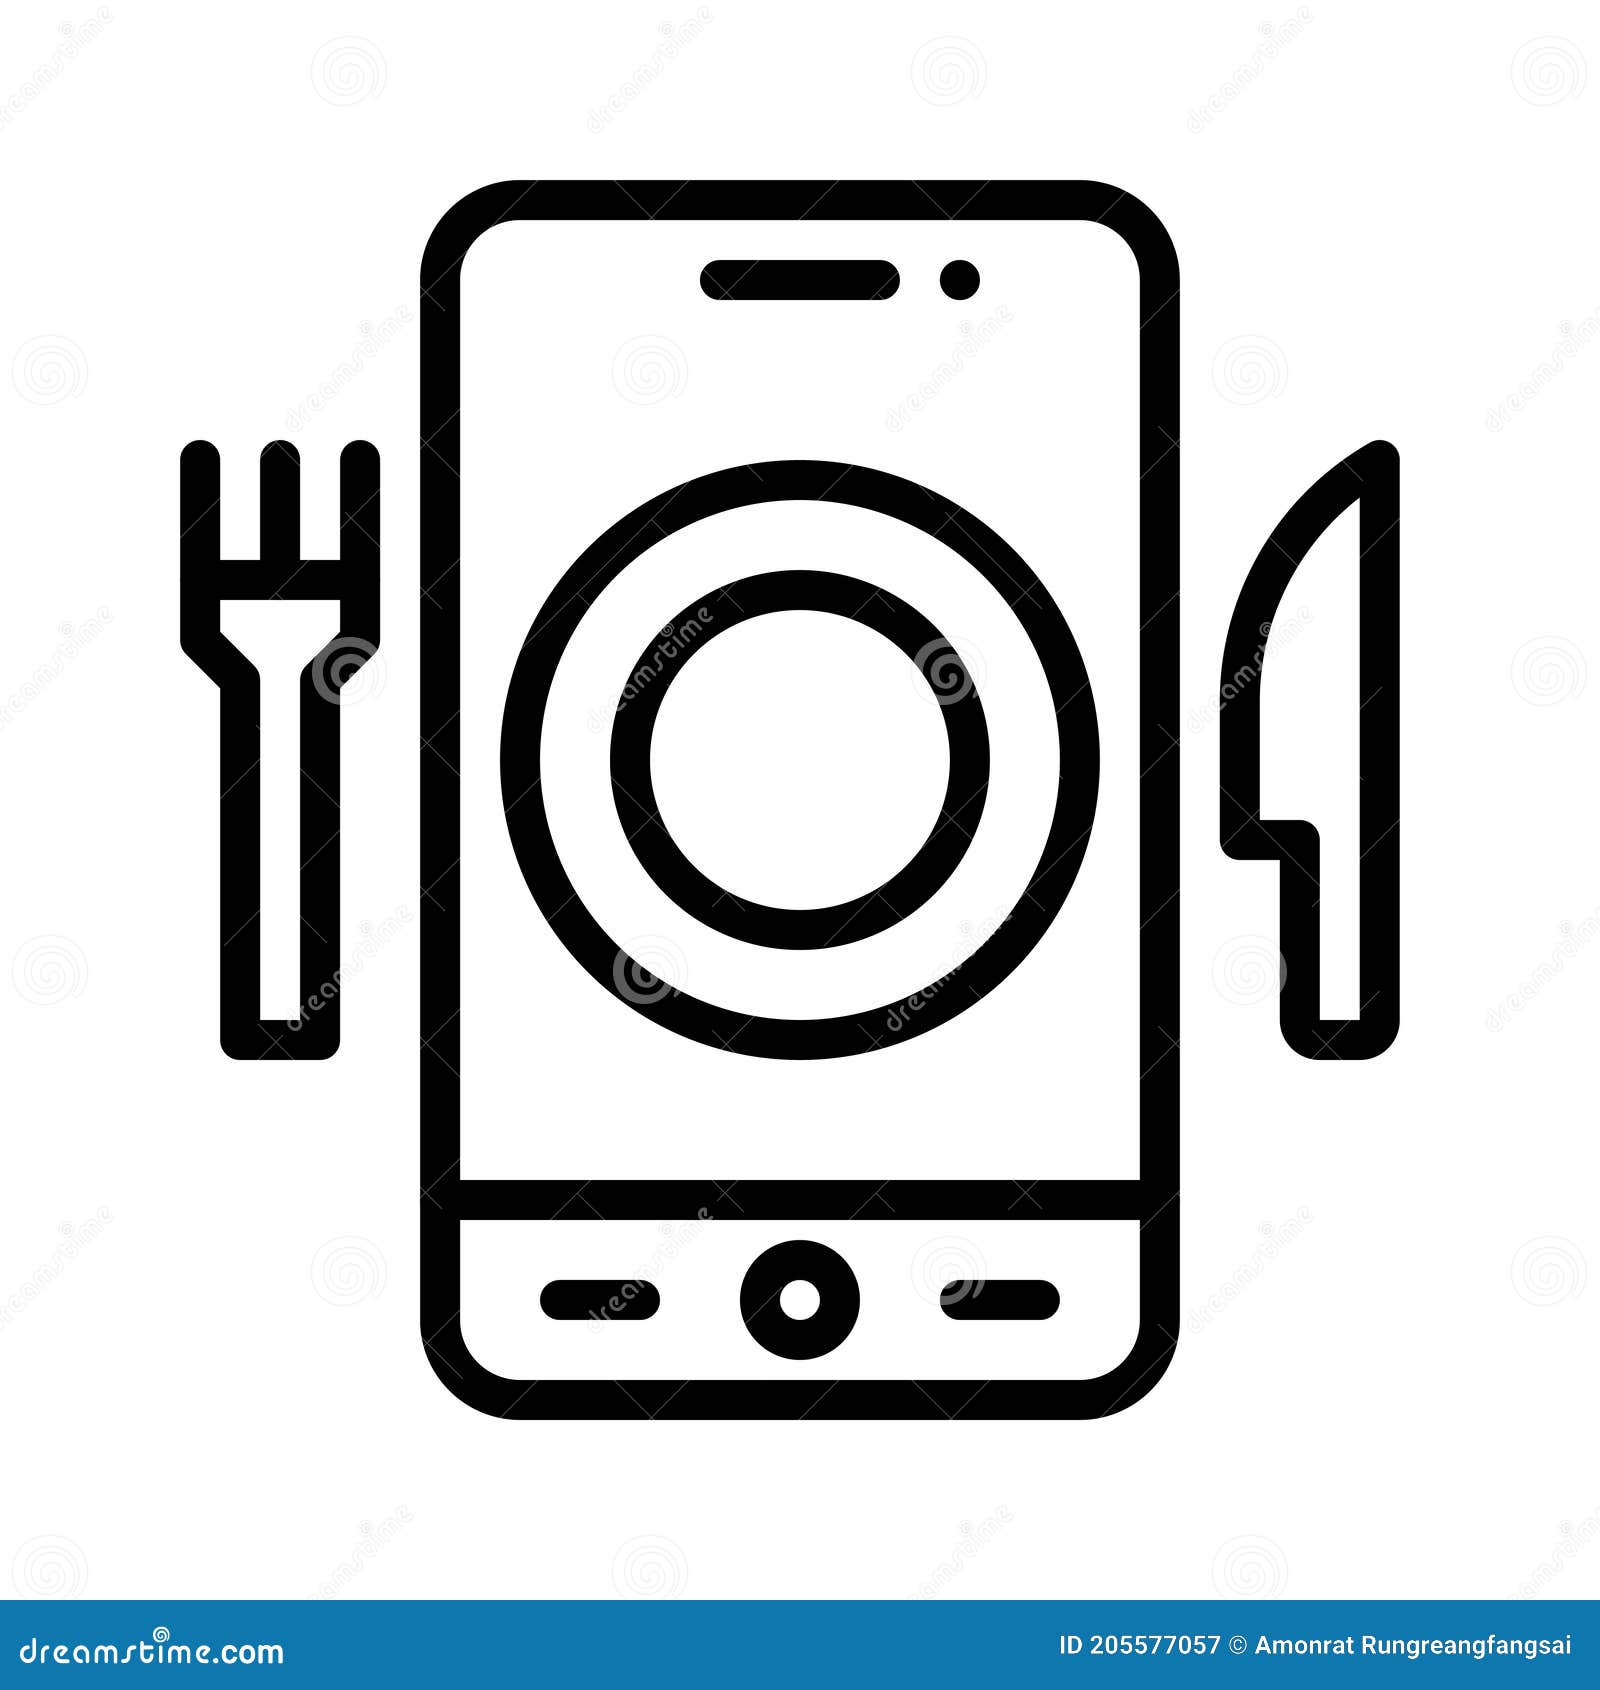 Food Delivery App Icon, Mobile Application Vector Illustration Stock ...